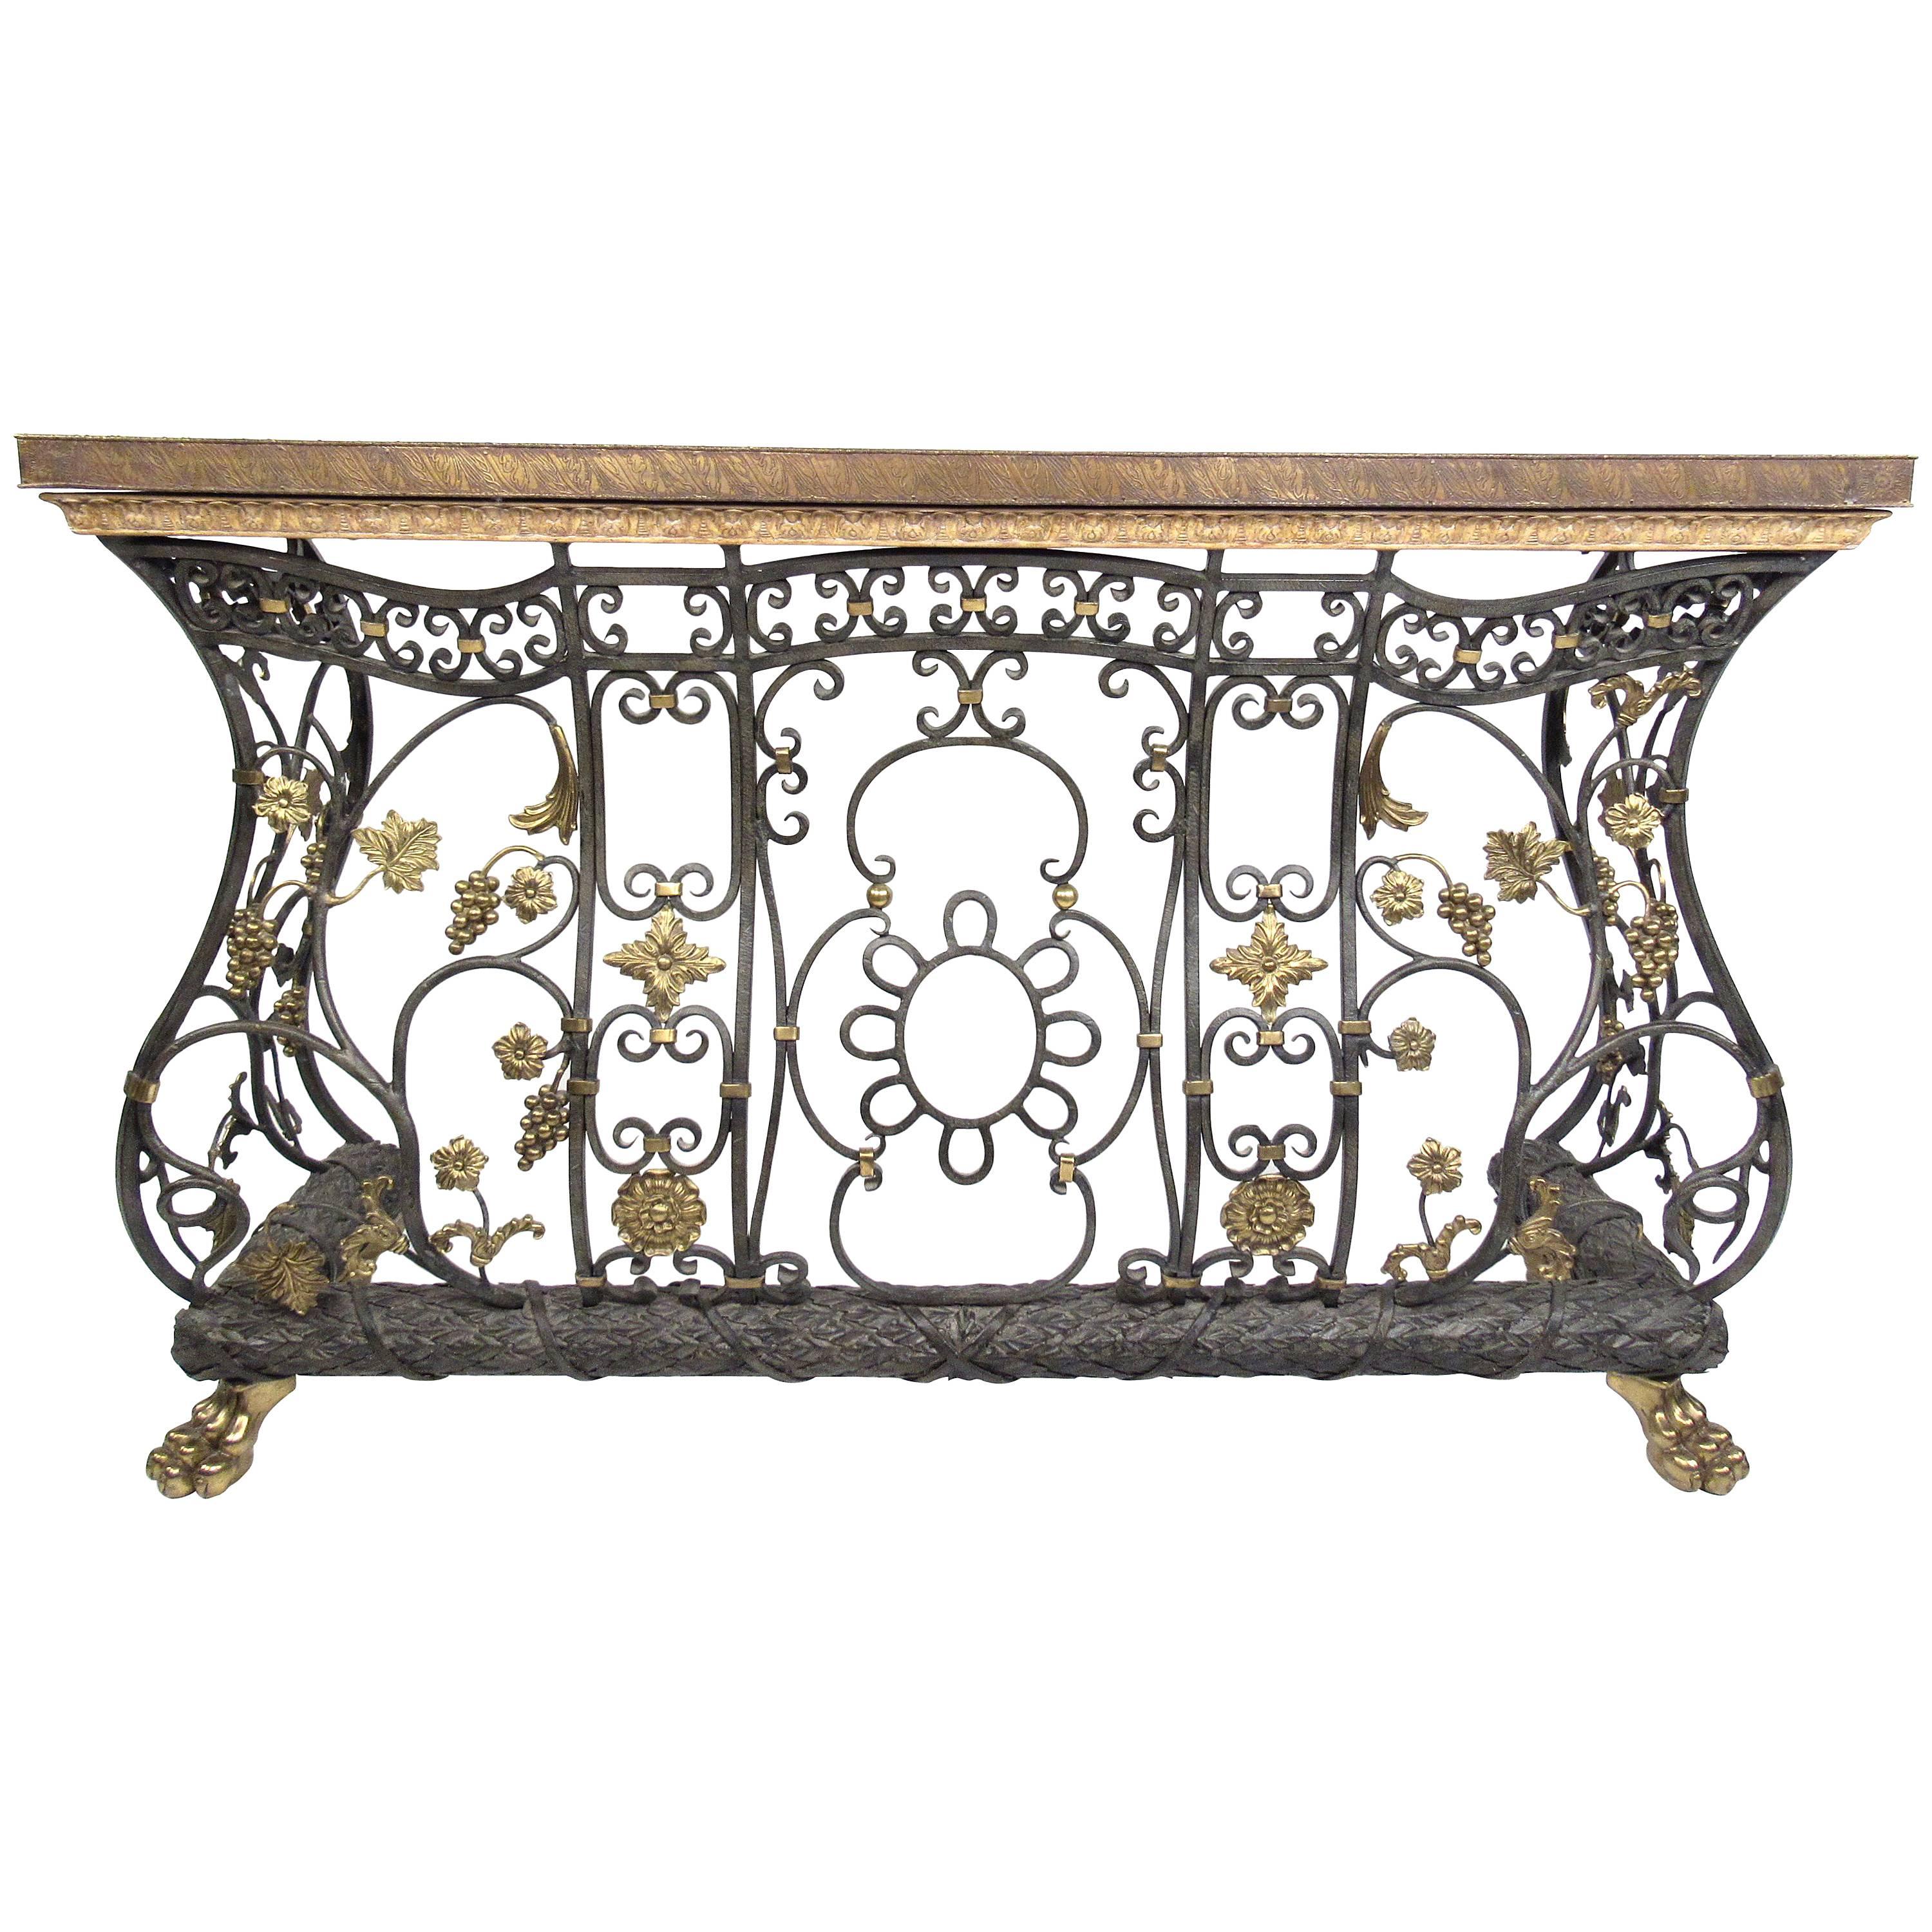 Ornate Iron, Brass and Bronze Decorative Console Table 